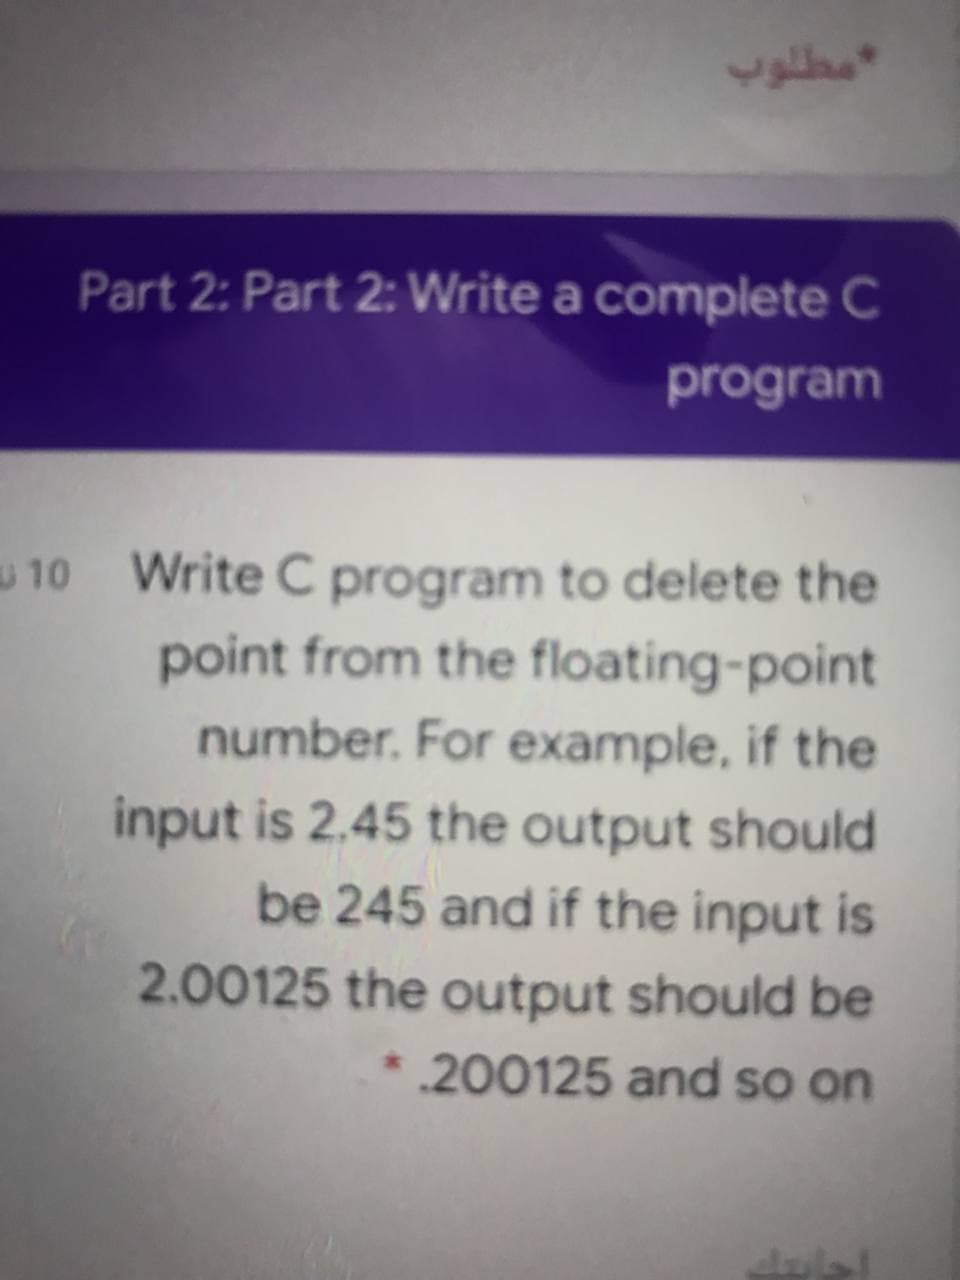 Part 2: Part 2: Write a complete C
program
10 Write C program to delete the
point from the floating-point
number. For example, if the
input is 2.45 the output should
be 245 and if the input is
2.00125 the output should be
200125 and so on
